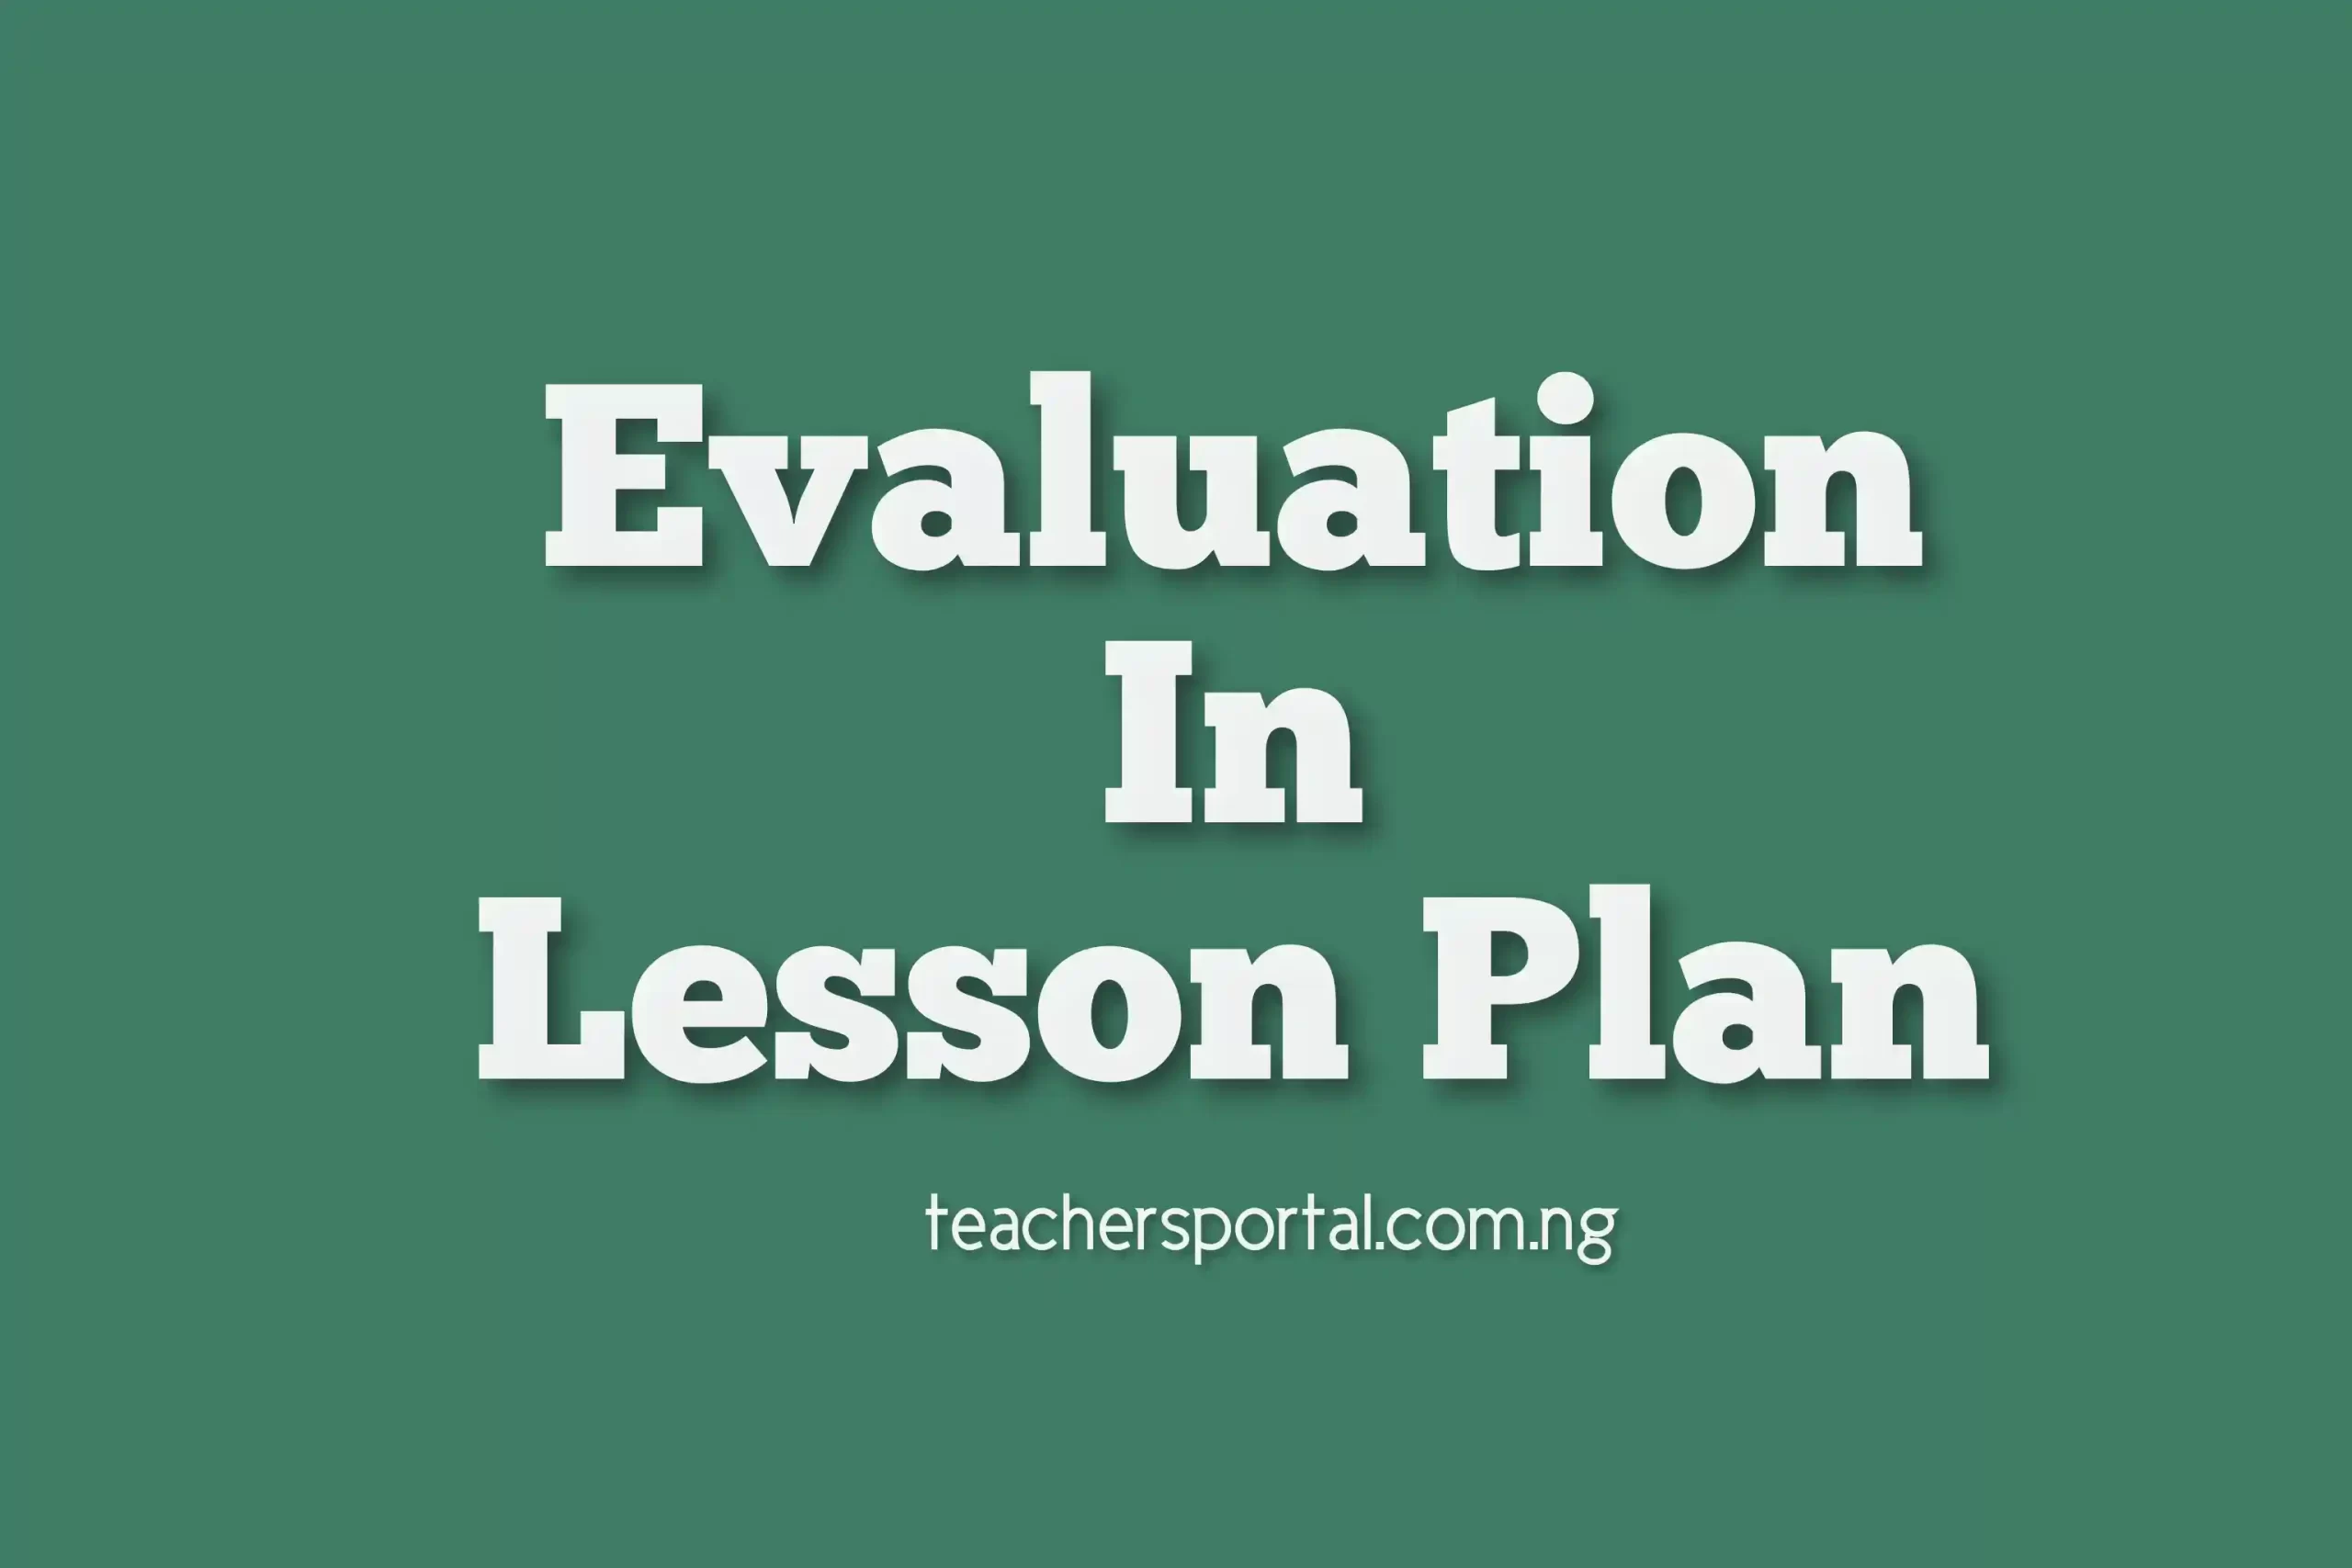 Evaluation in Lesson Plan